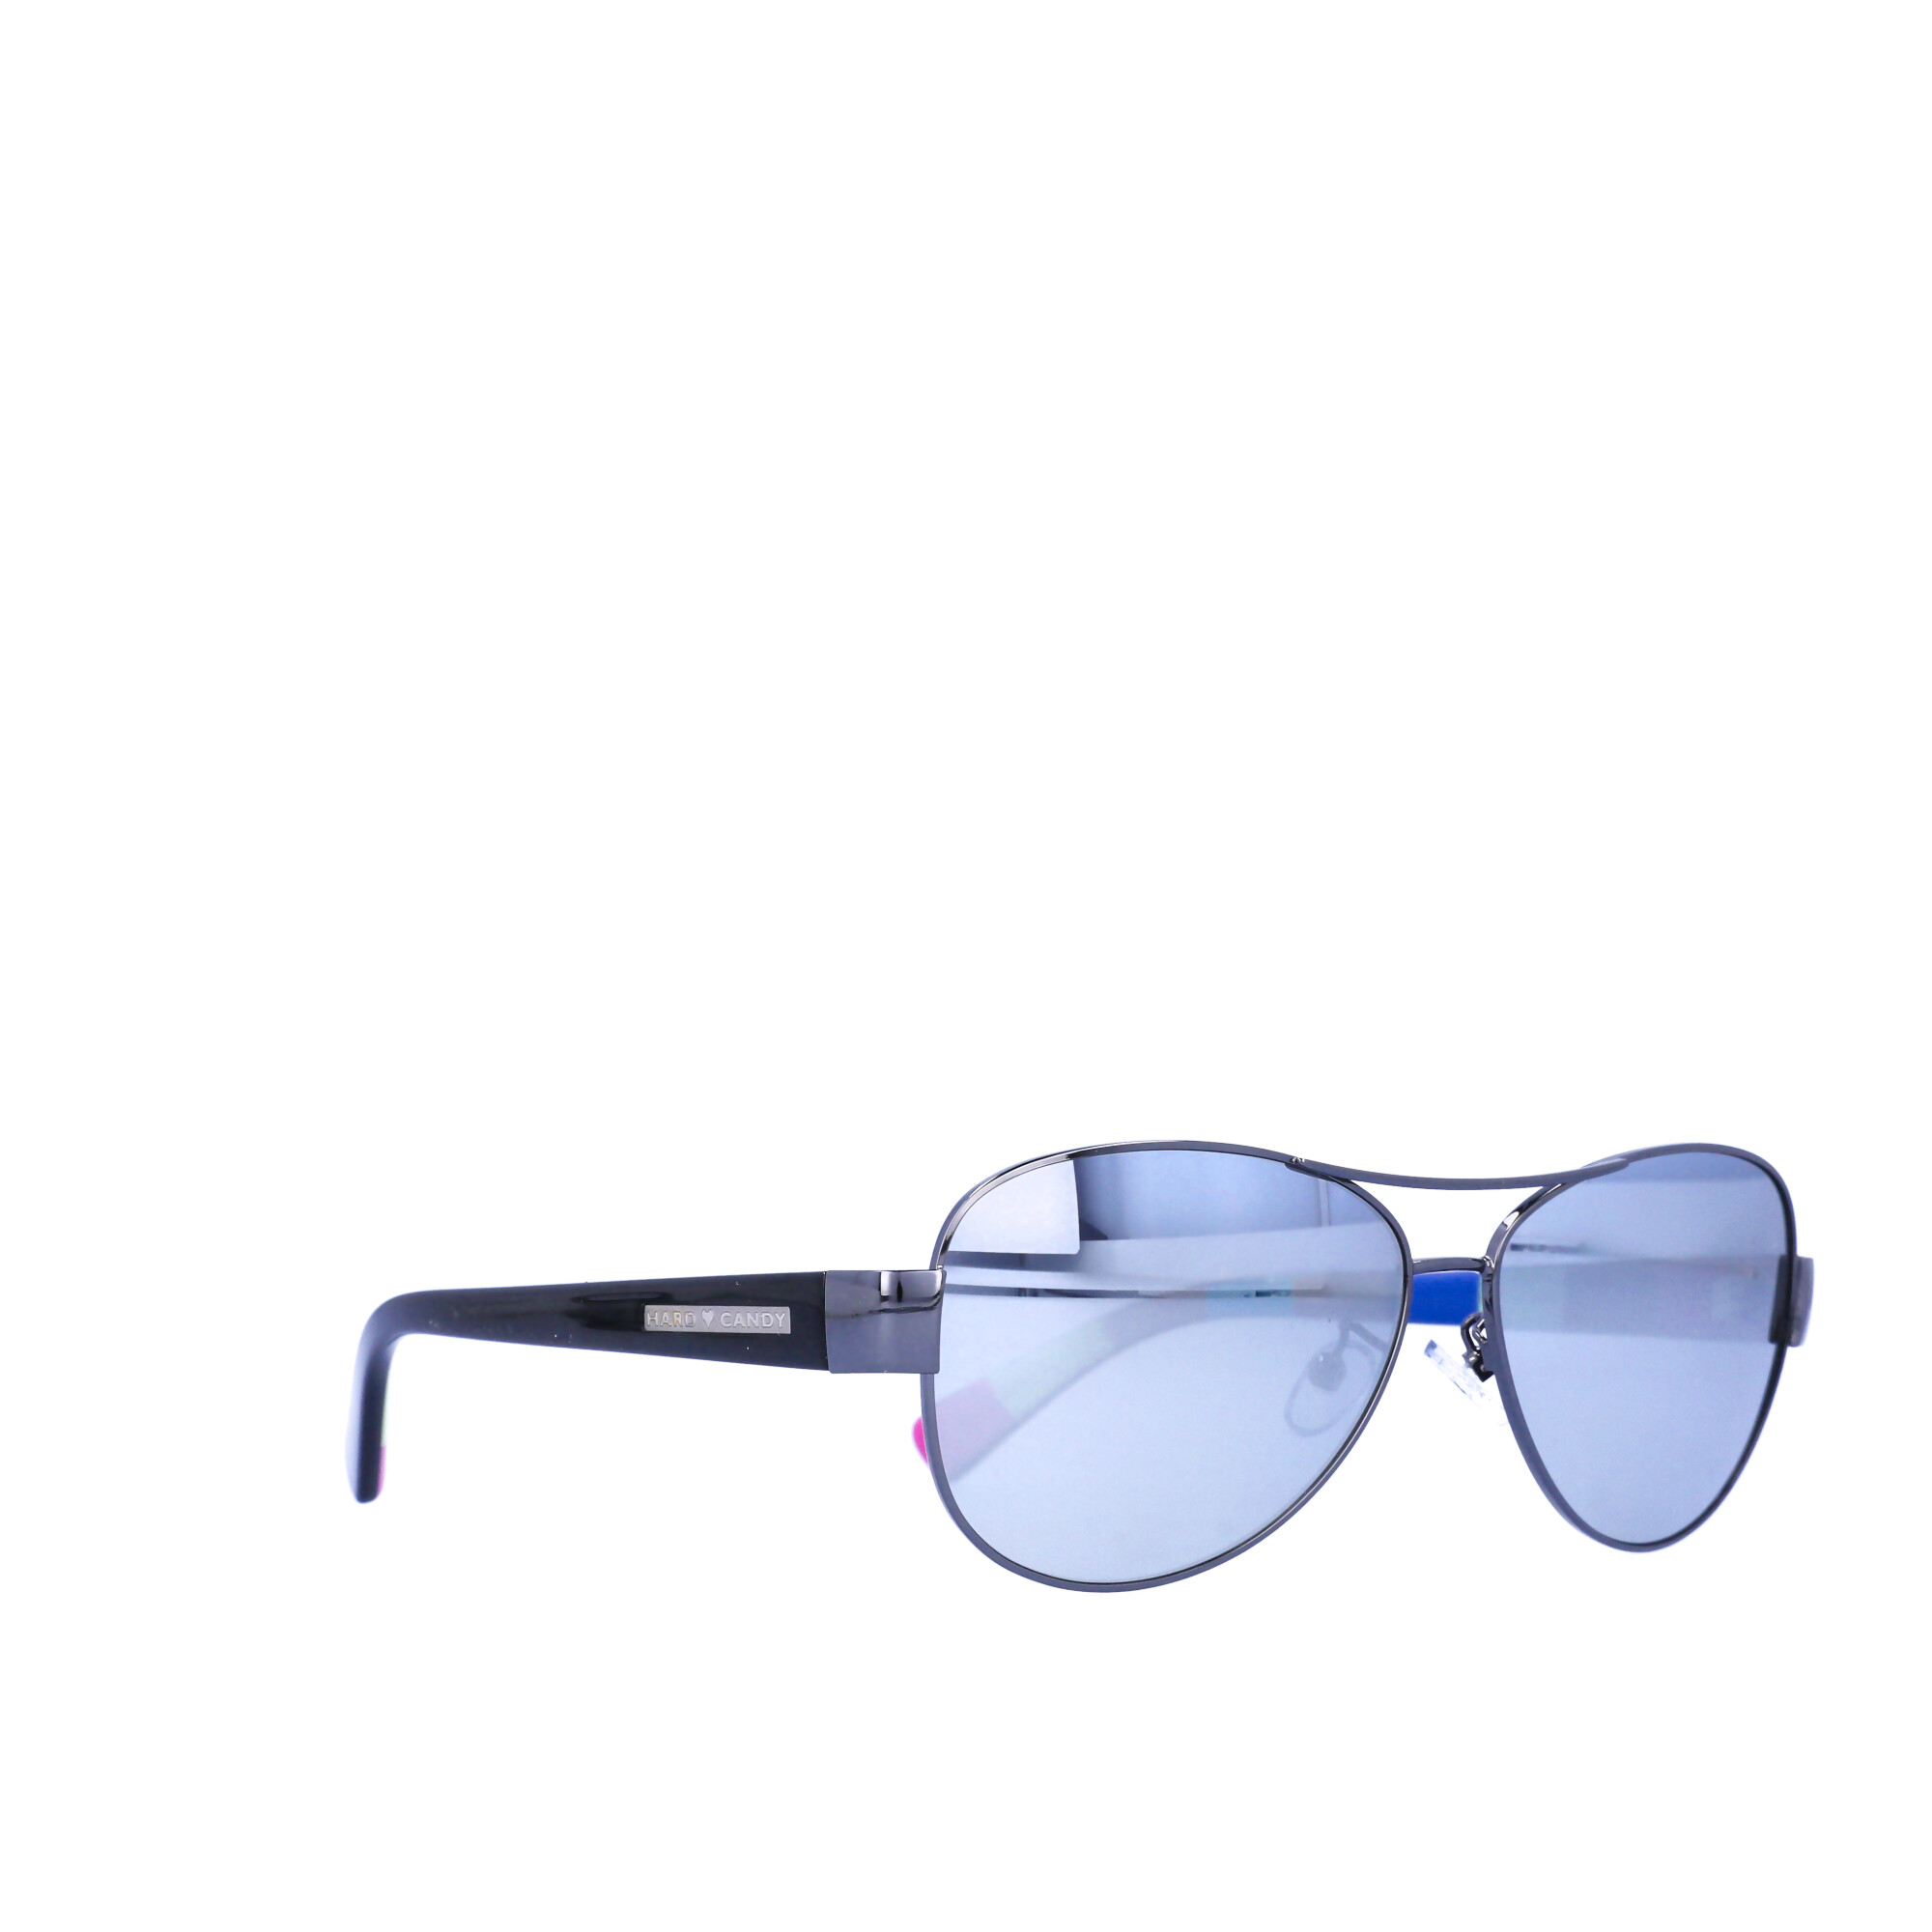 Hard Candy Womens Polarized Rx'able Sunglasses, Hs04P, Gun Metal, 59-13-136, with Case - image 2 of 13